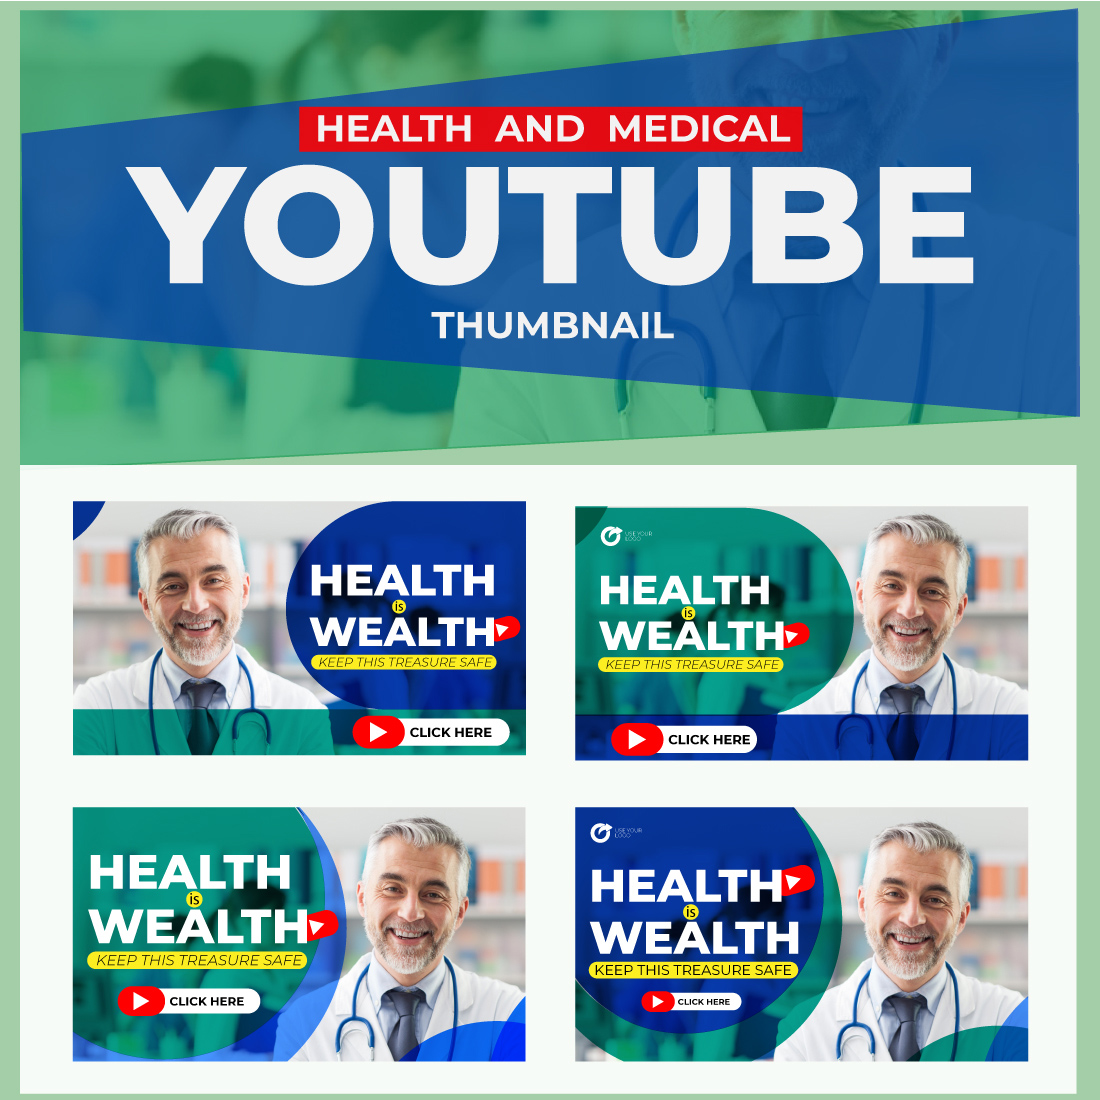 YouTube Thumbnail Template for Health and Medical cover image.